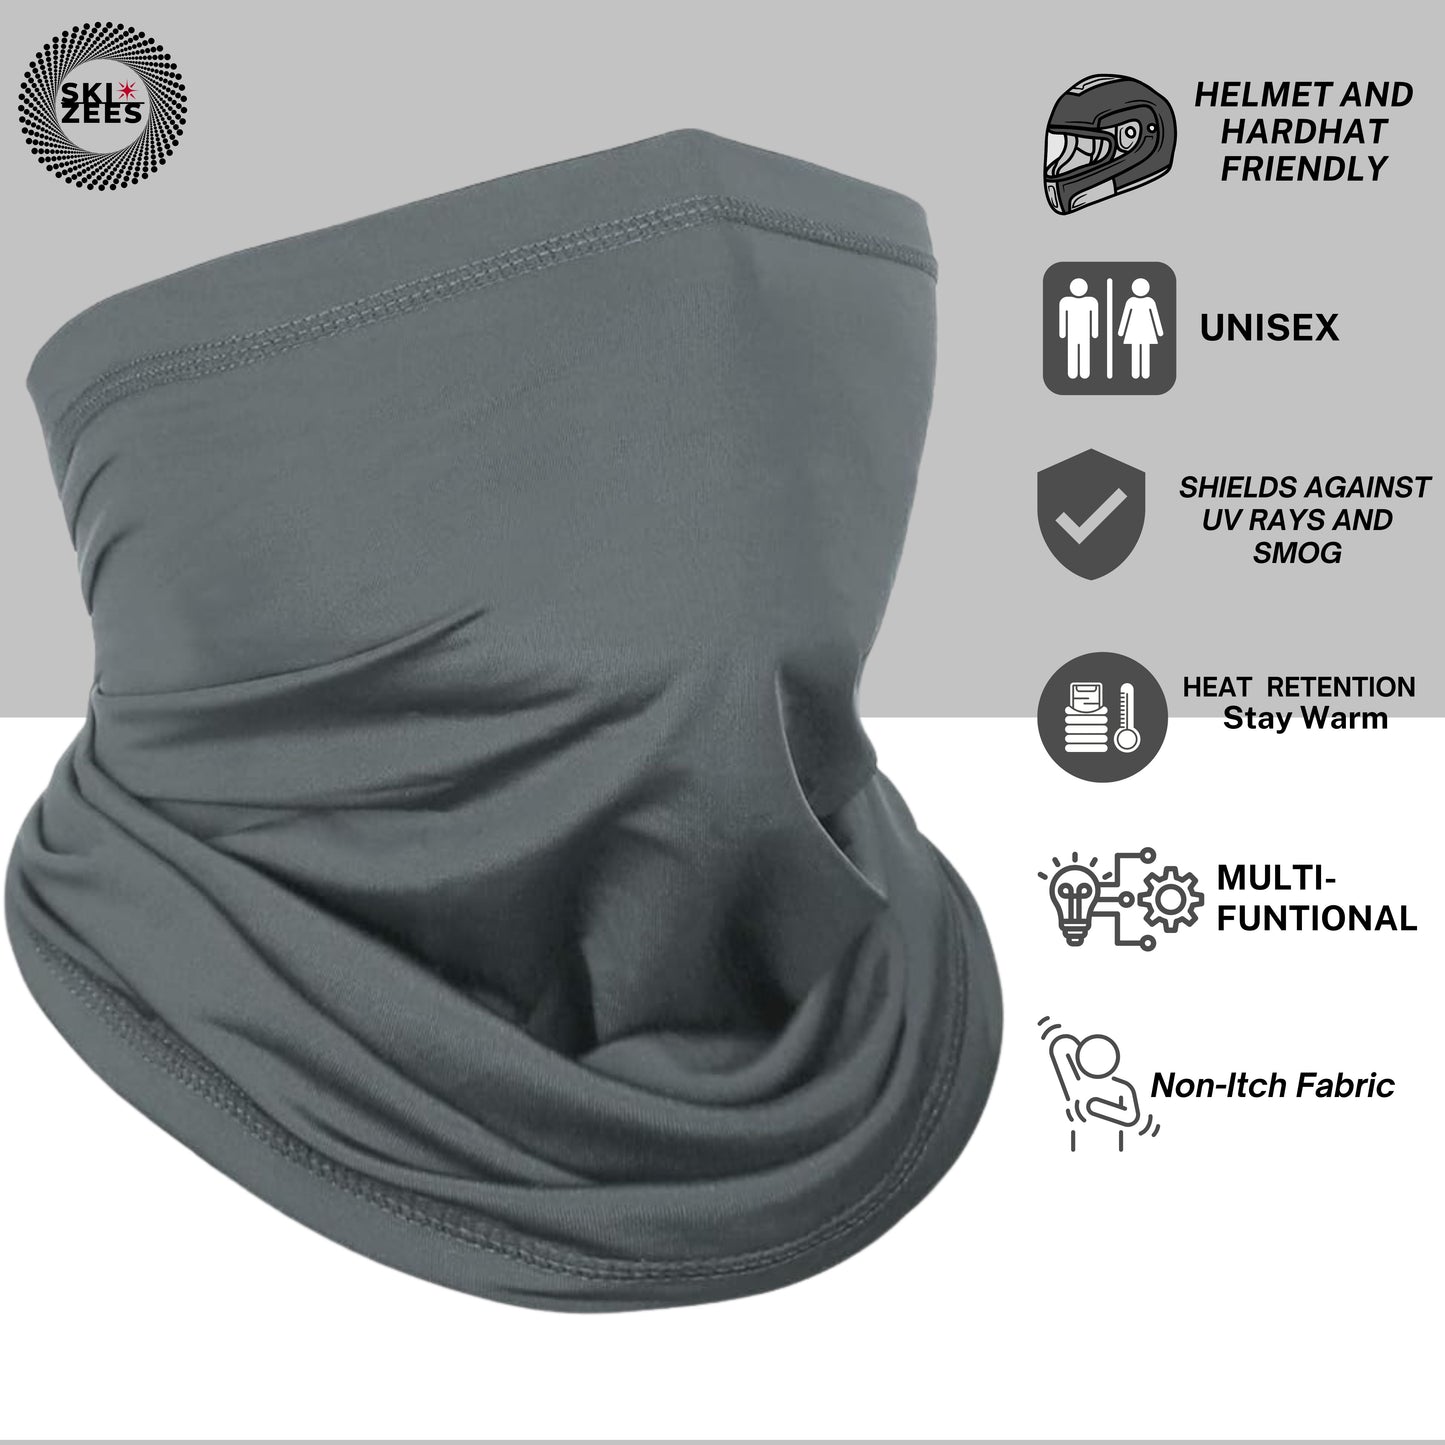 Helmet and hardhat, friendly unisex, great neck, gaiter, heat retention, stay warm tube, mask, multi, functional, non-itch fabric